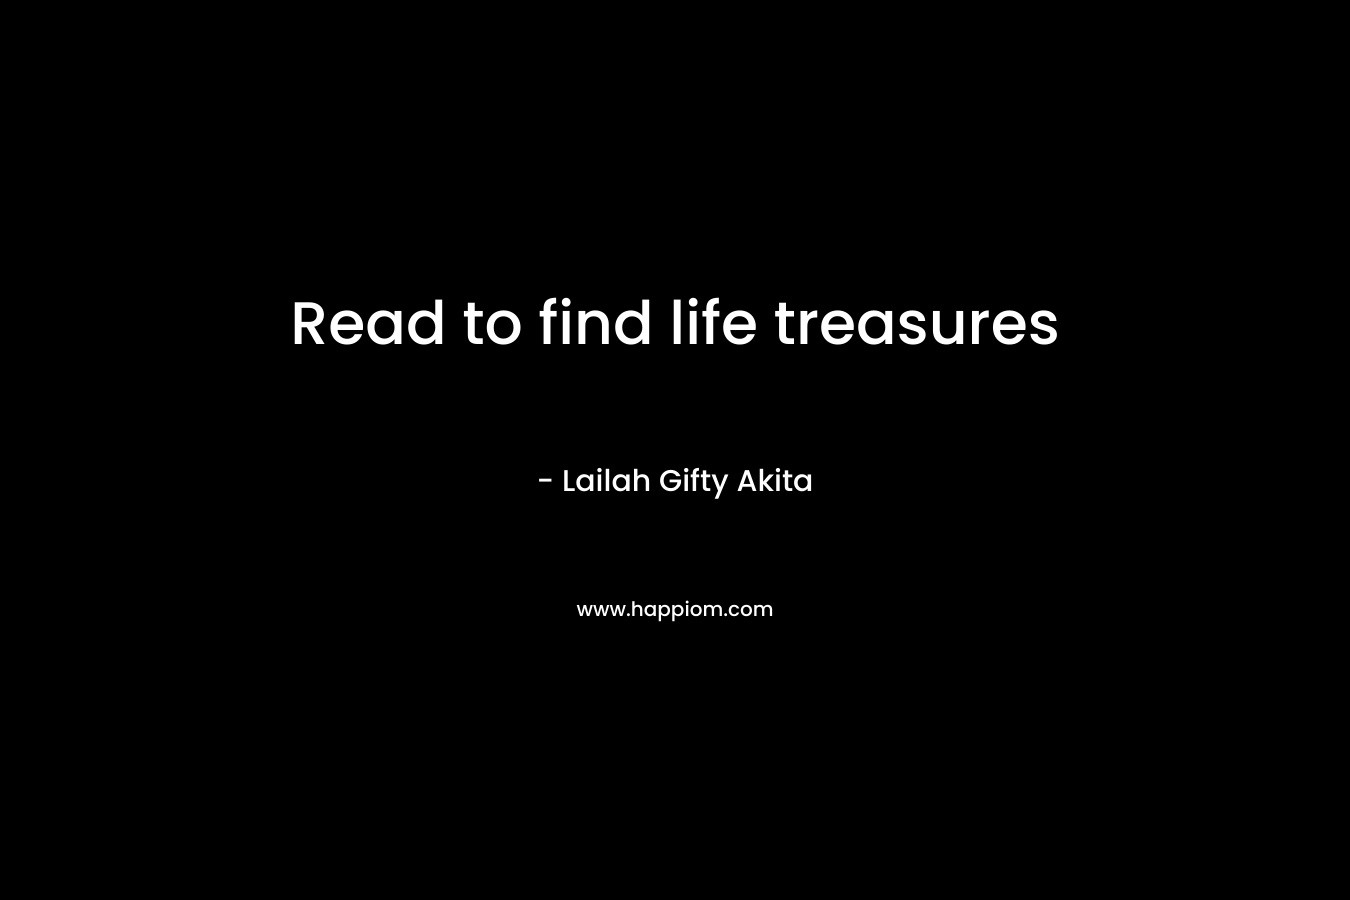 Read to find life treasures